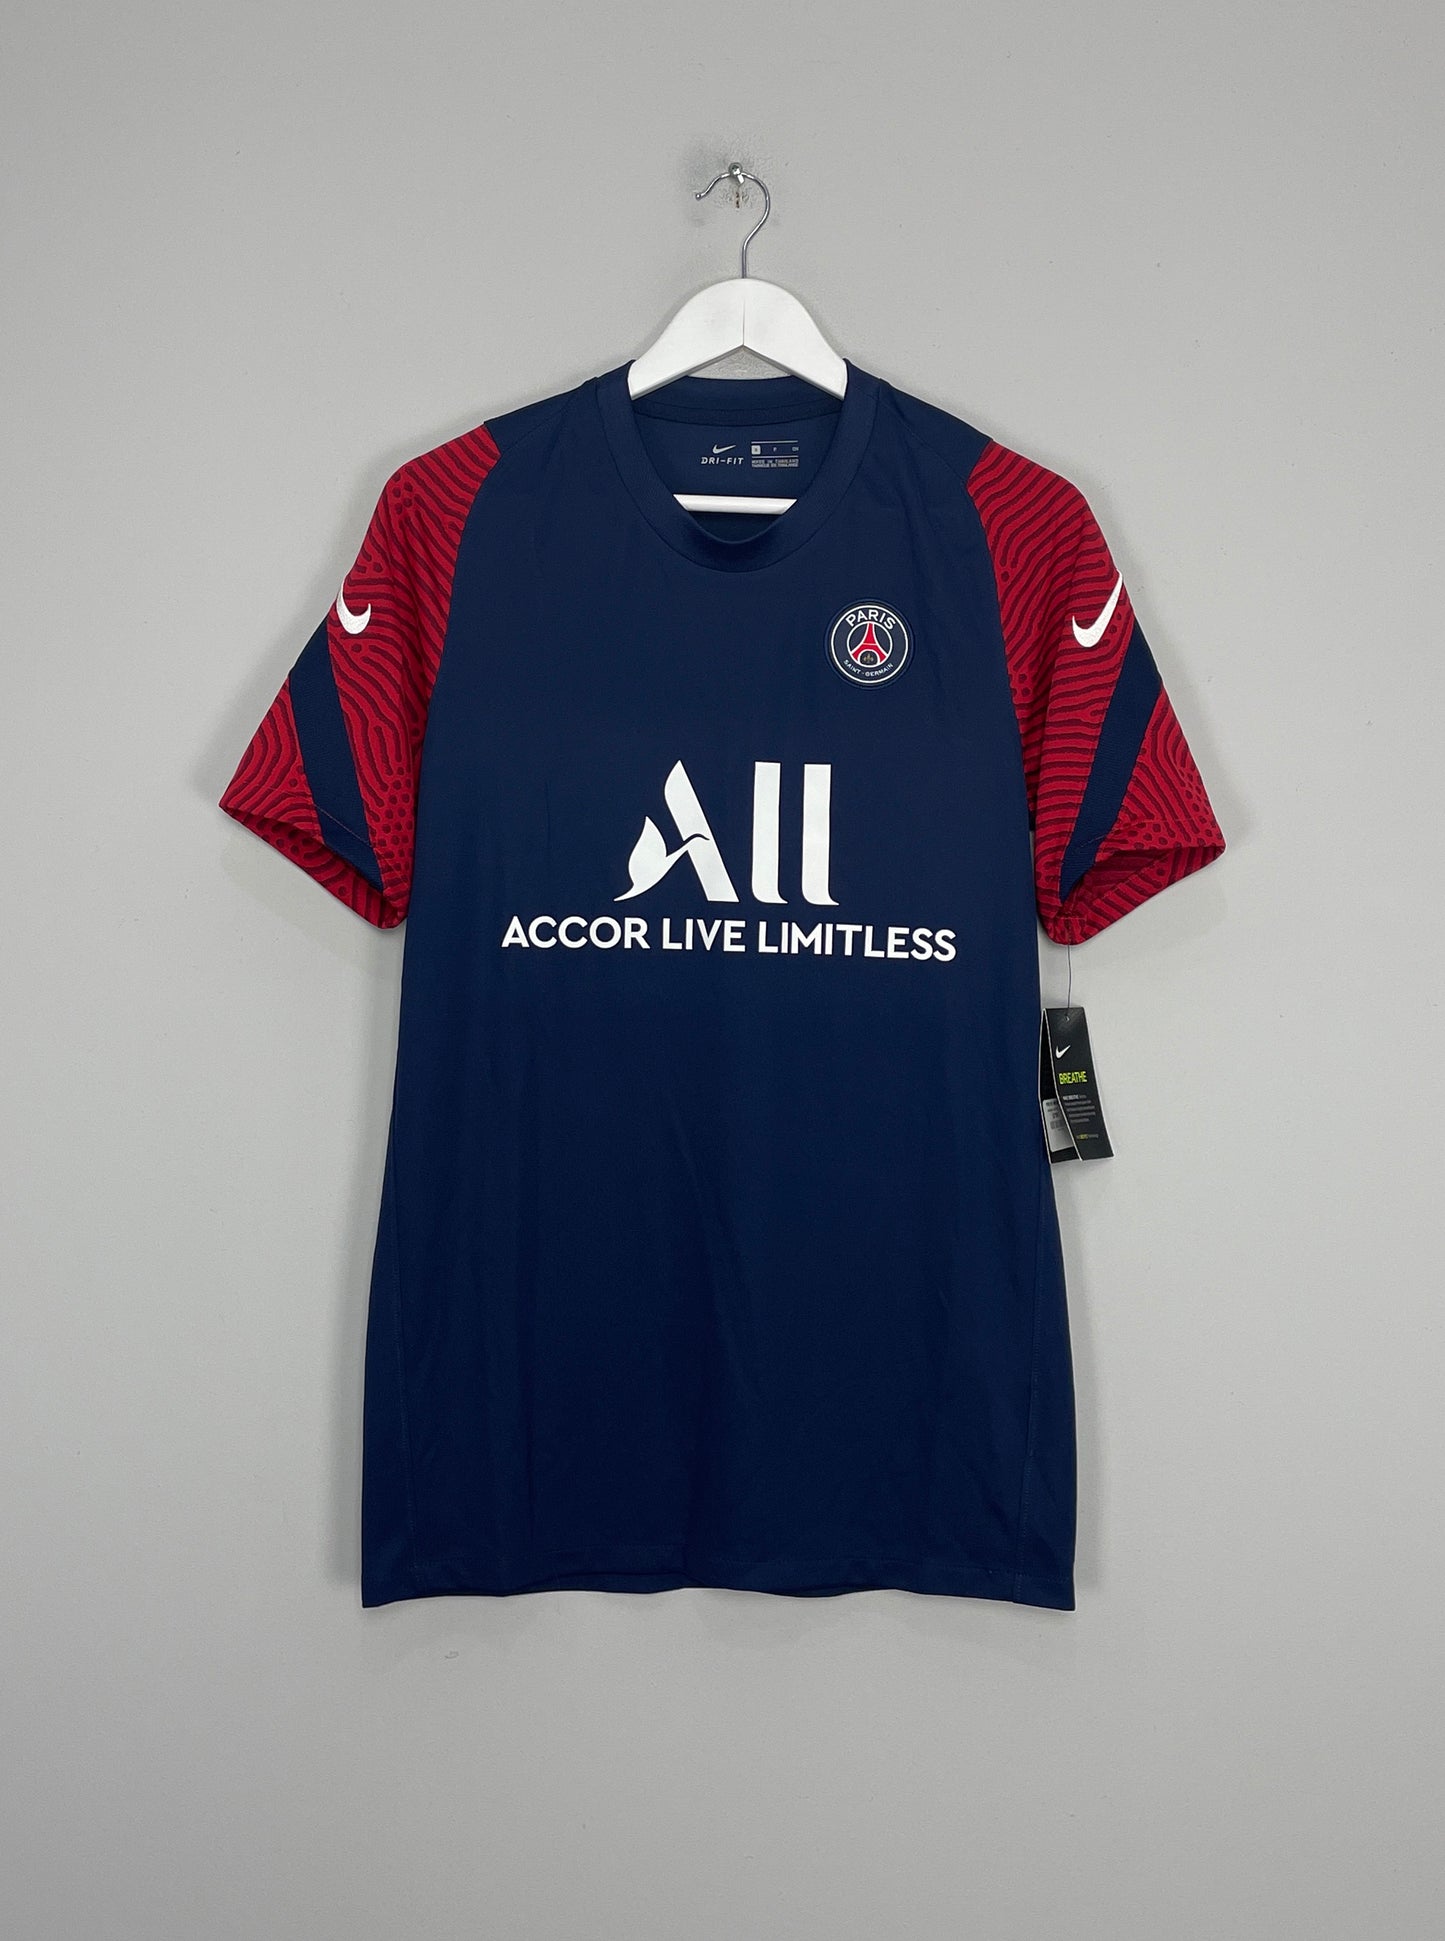 Image of the PSG training shirt from the 2020/21 season